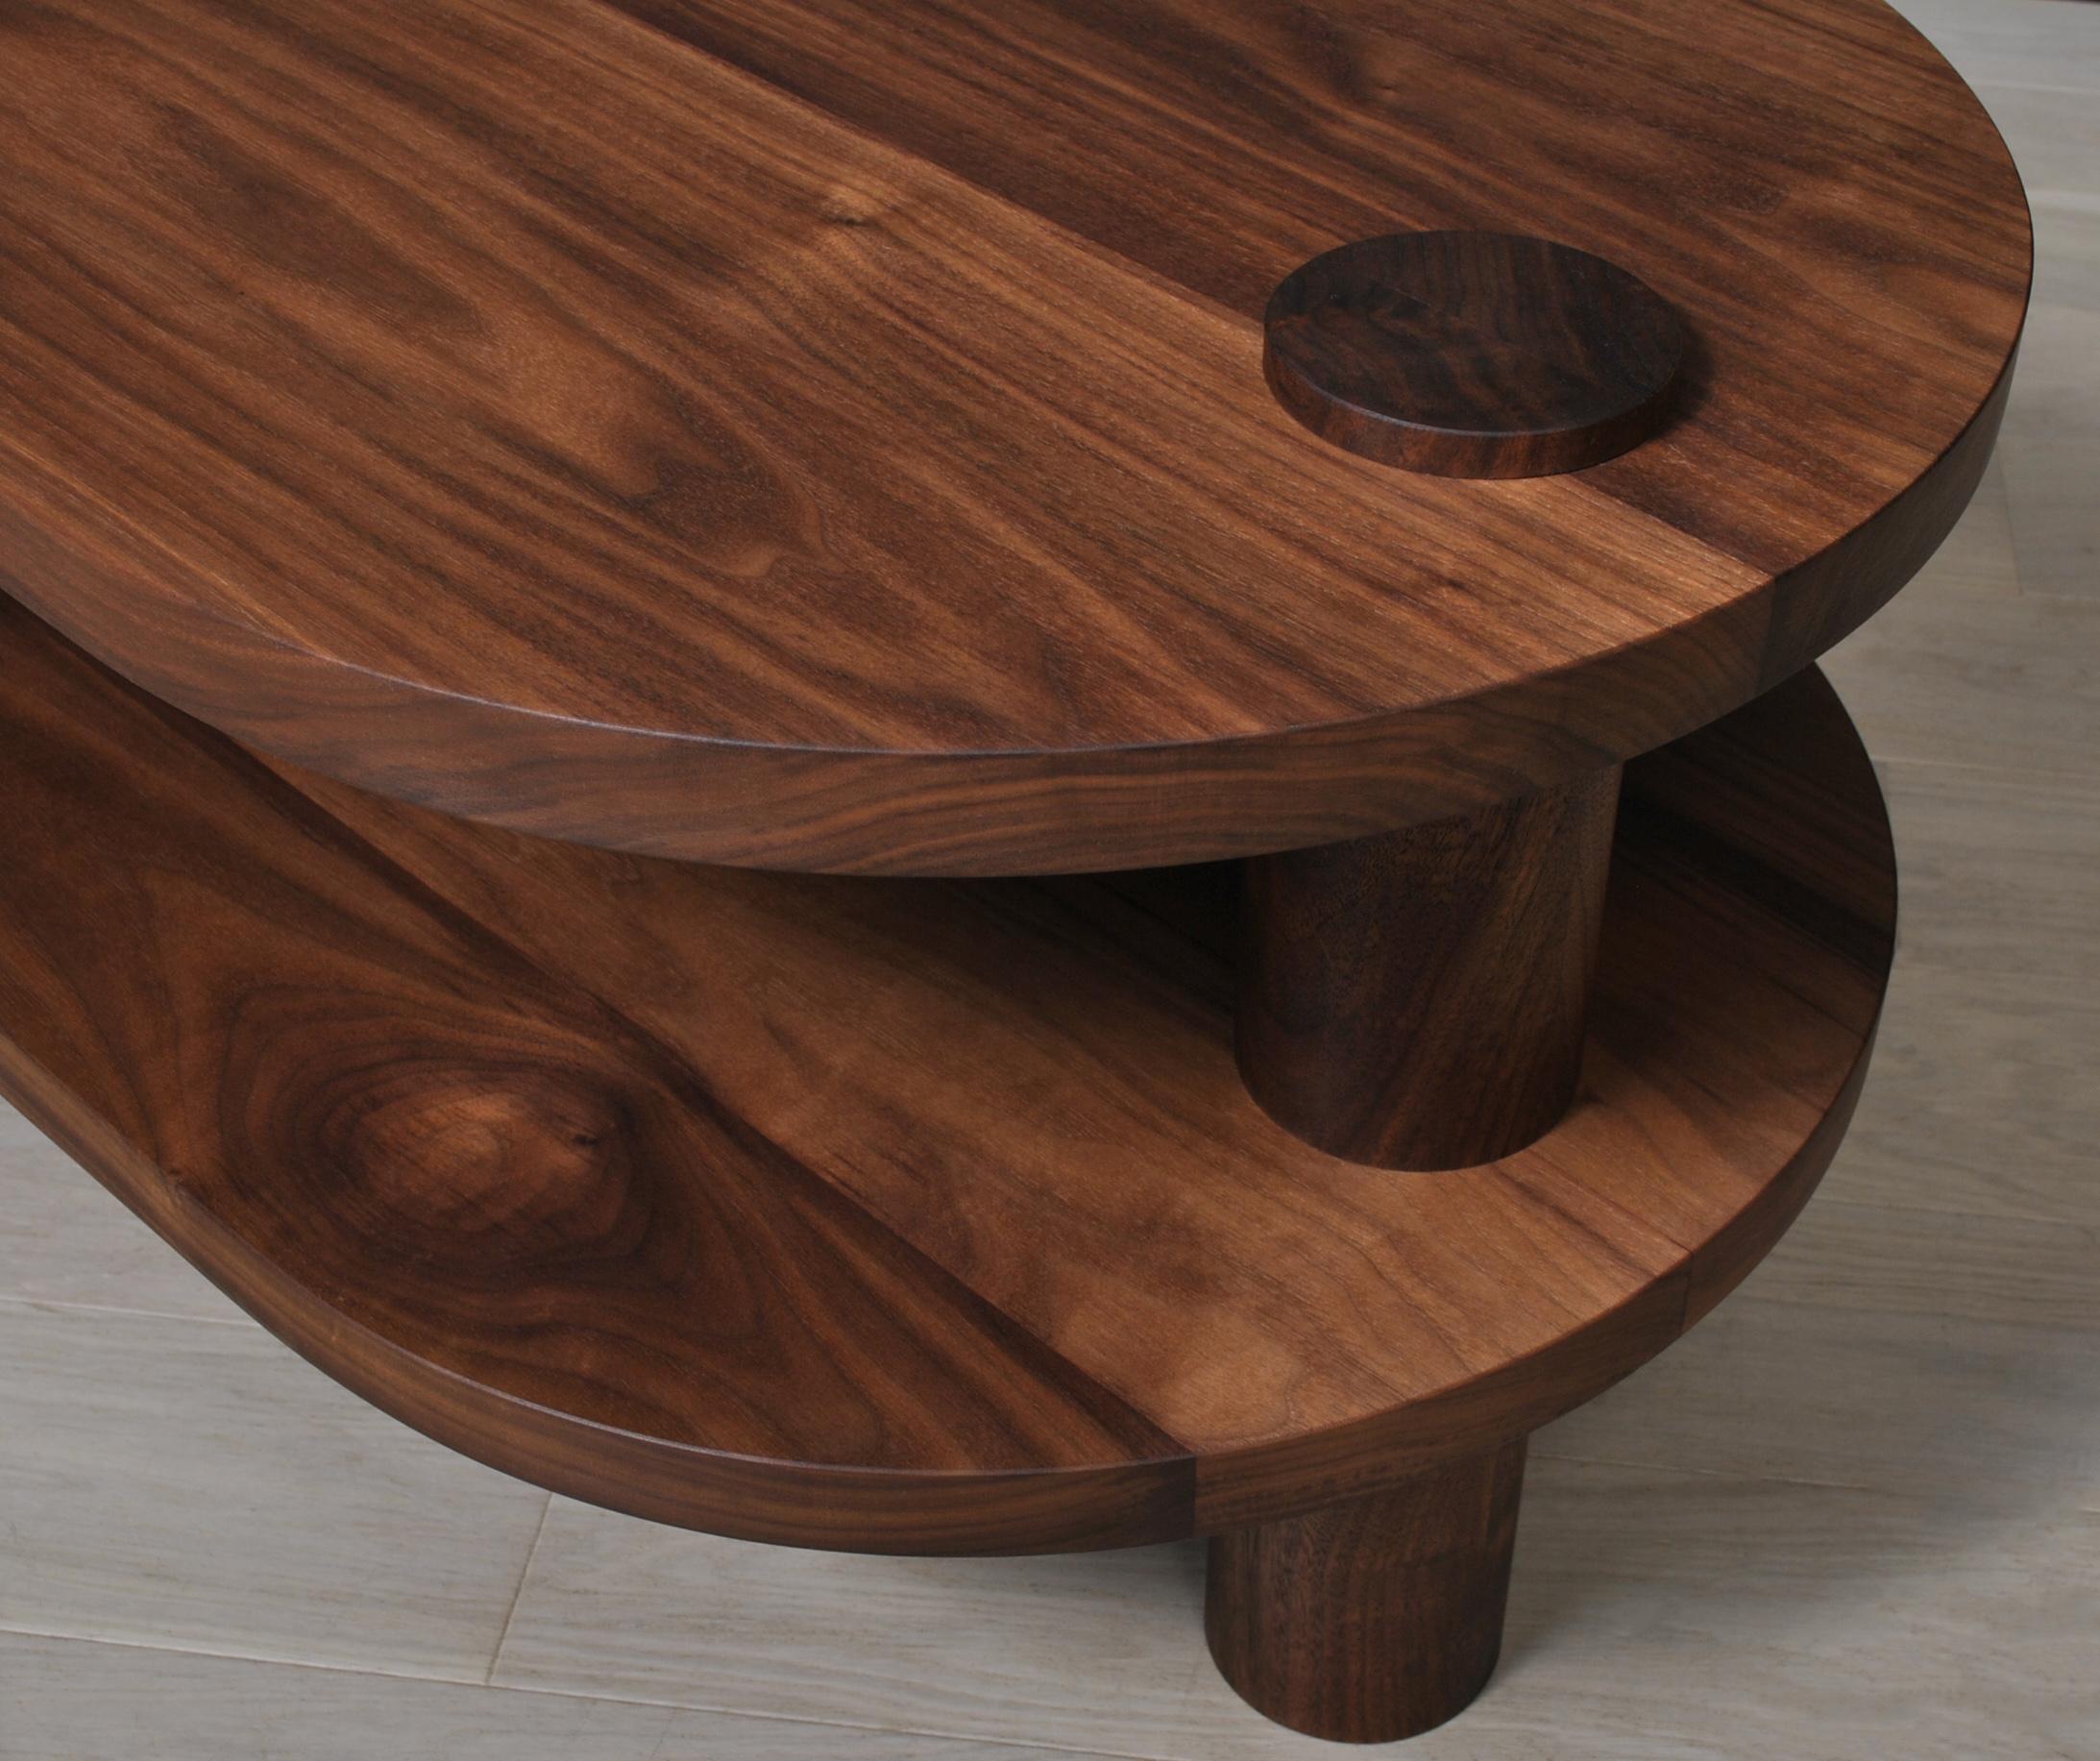 Post-Modern Architectural Handcrafted Walnut Coffee Table